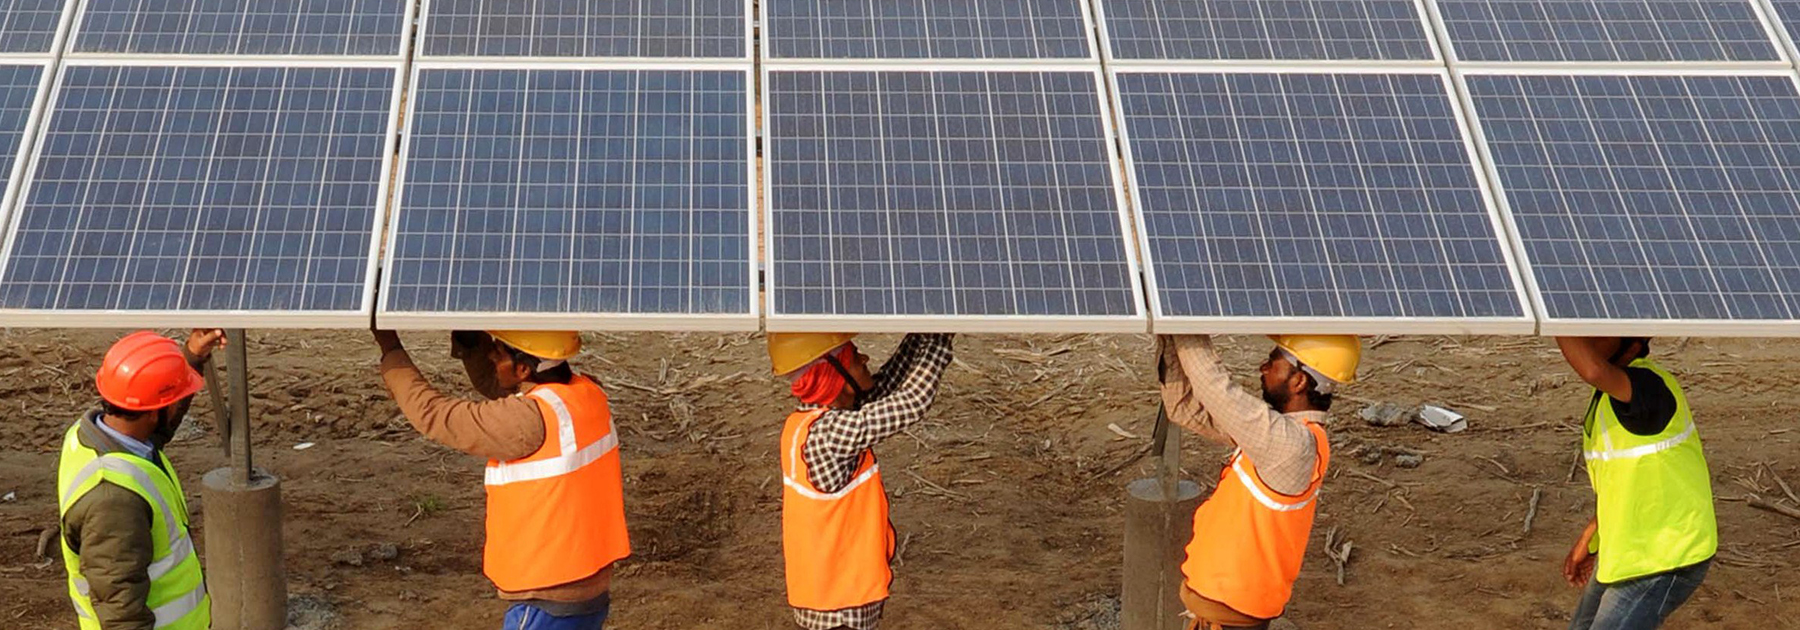 Workers construct part of the France-India Solar Direct Punjab Solar Park project in Muradwala. (NARINDER NANU/AFP/Getty Images